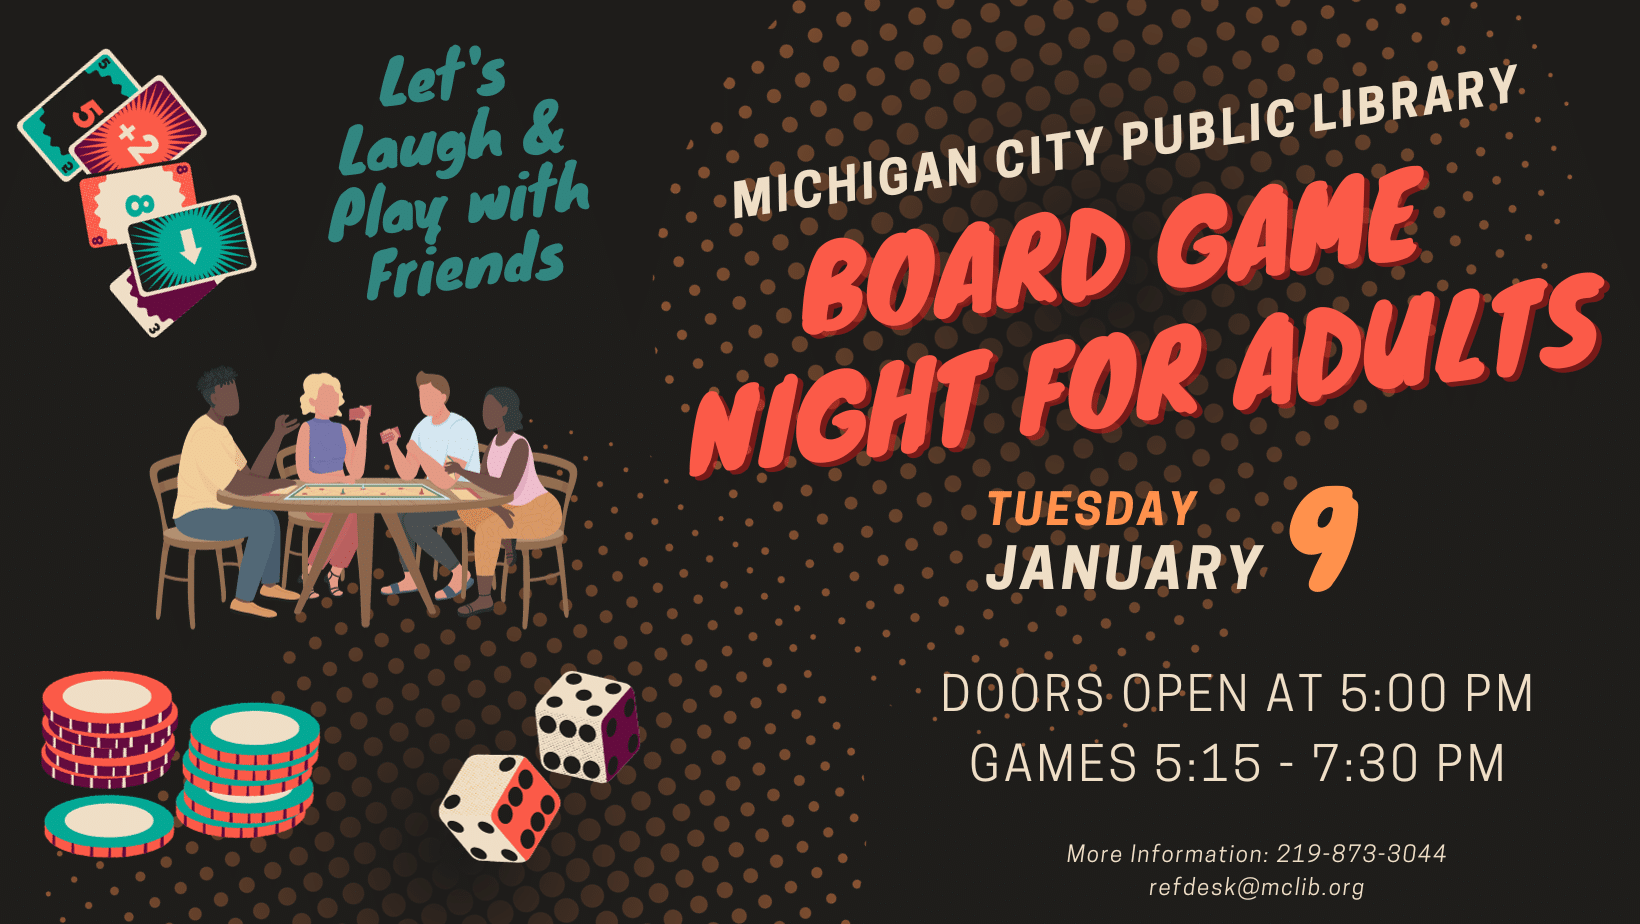 Board Game Night for Adults, Tuesday, January 9, 5-7:30 pm